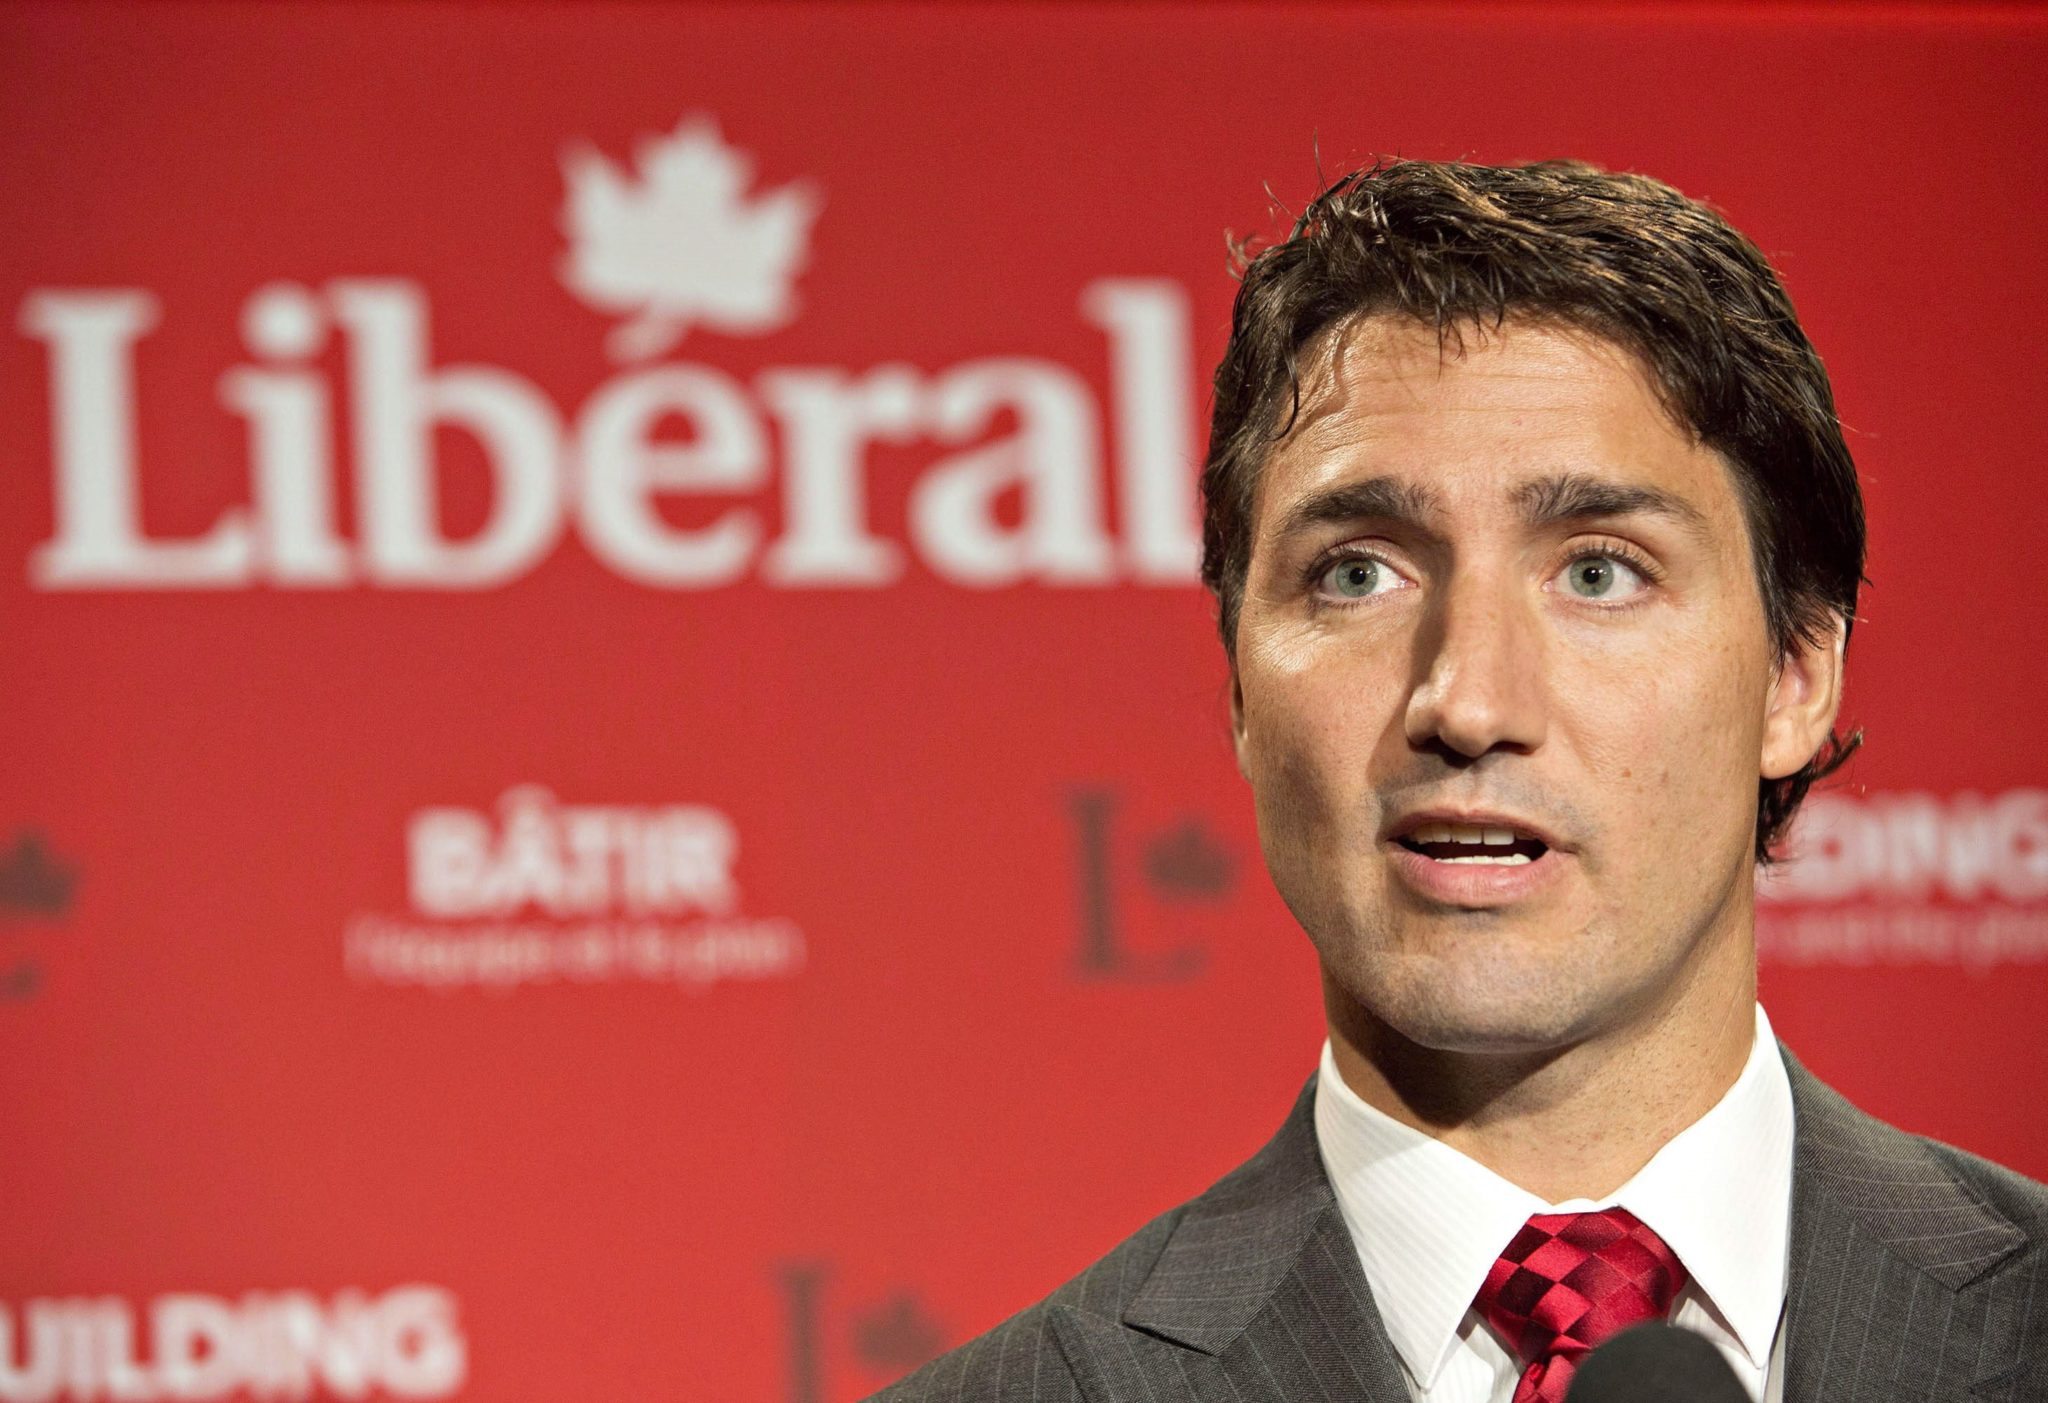 Trudeau Says Seniors Care a Priority for New Government